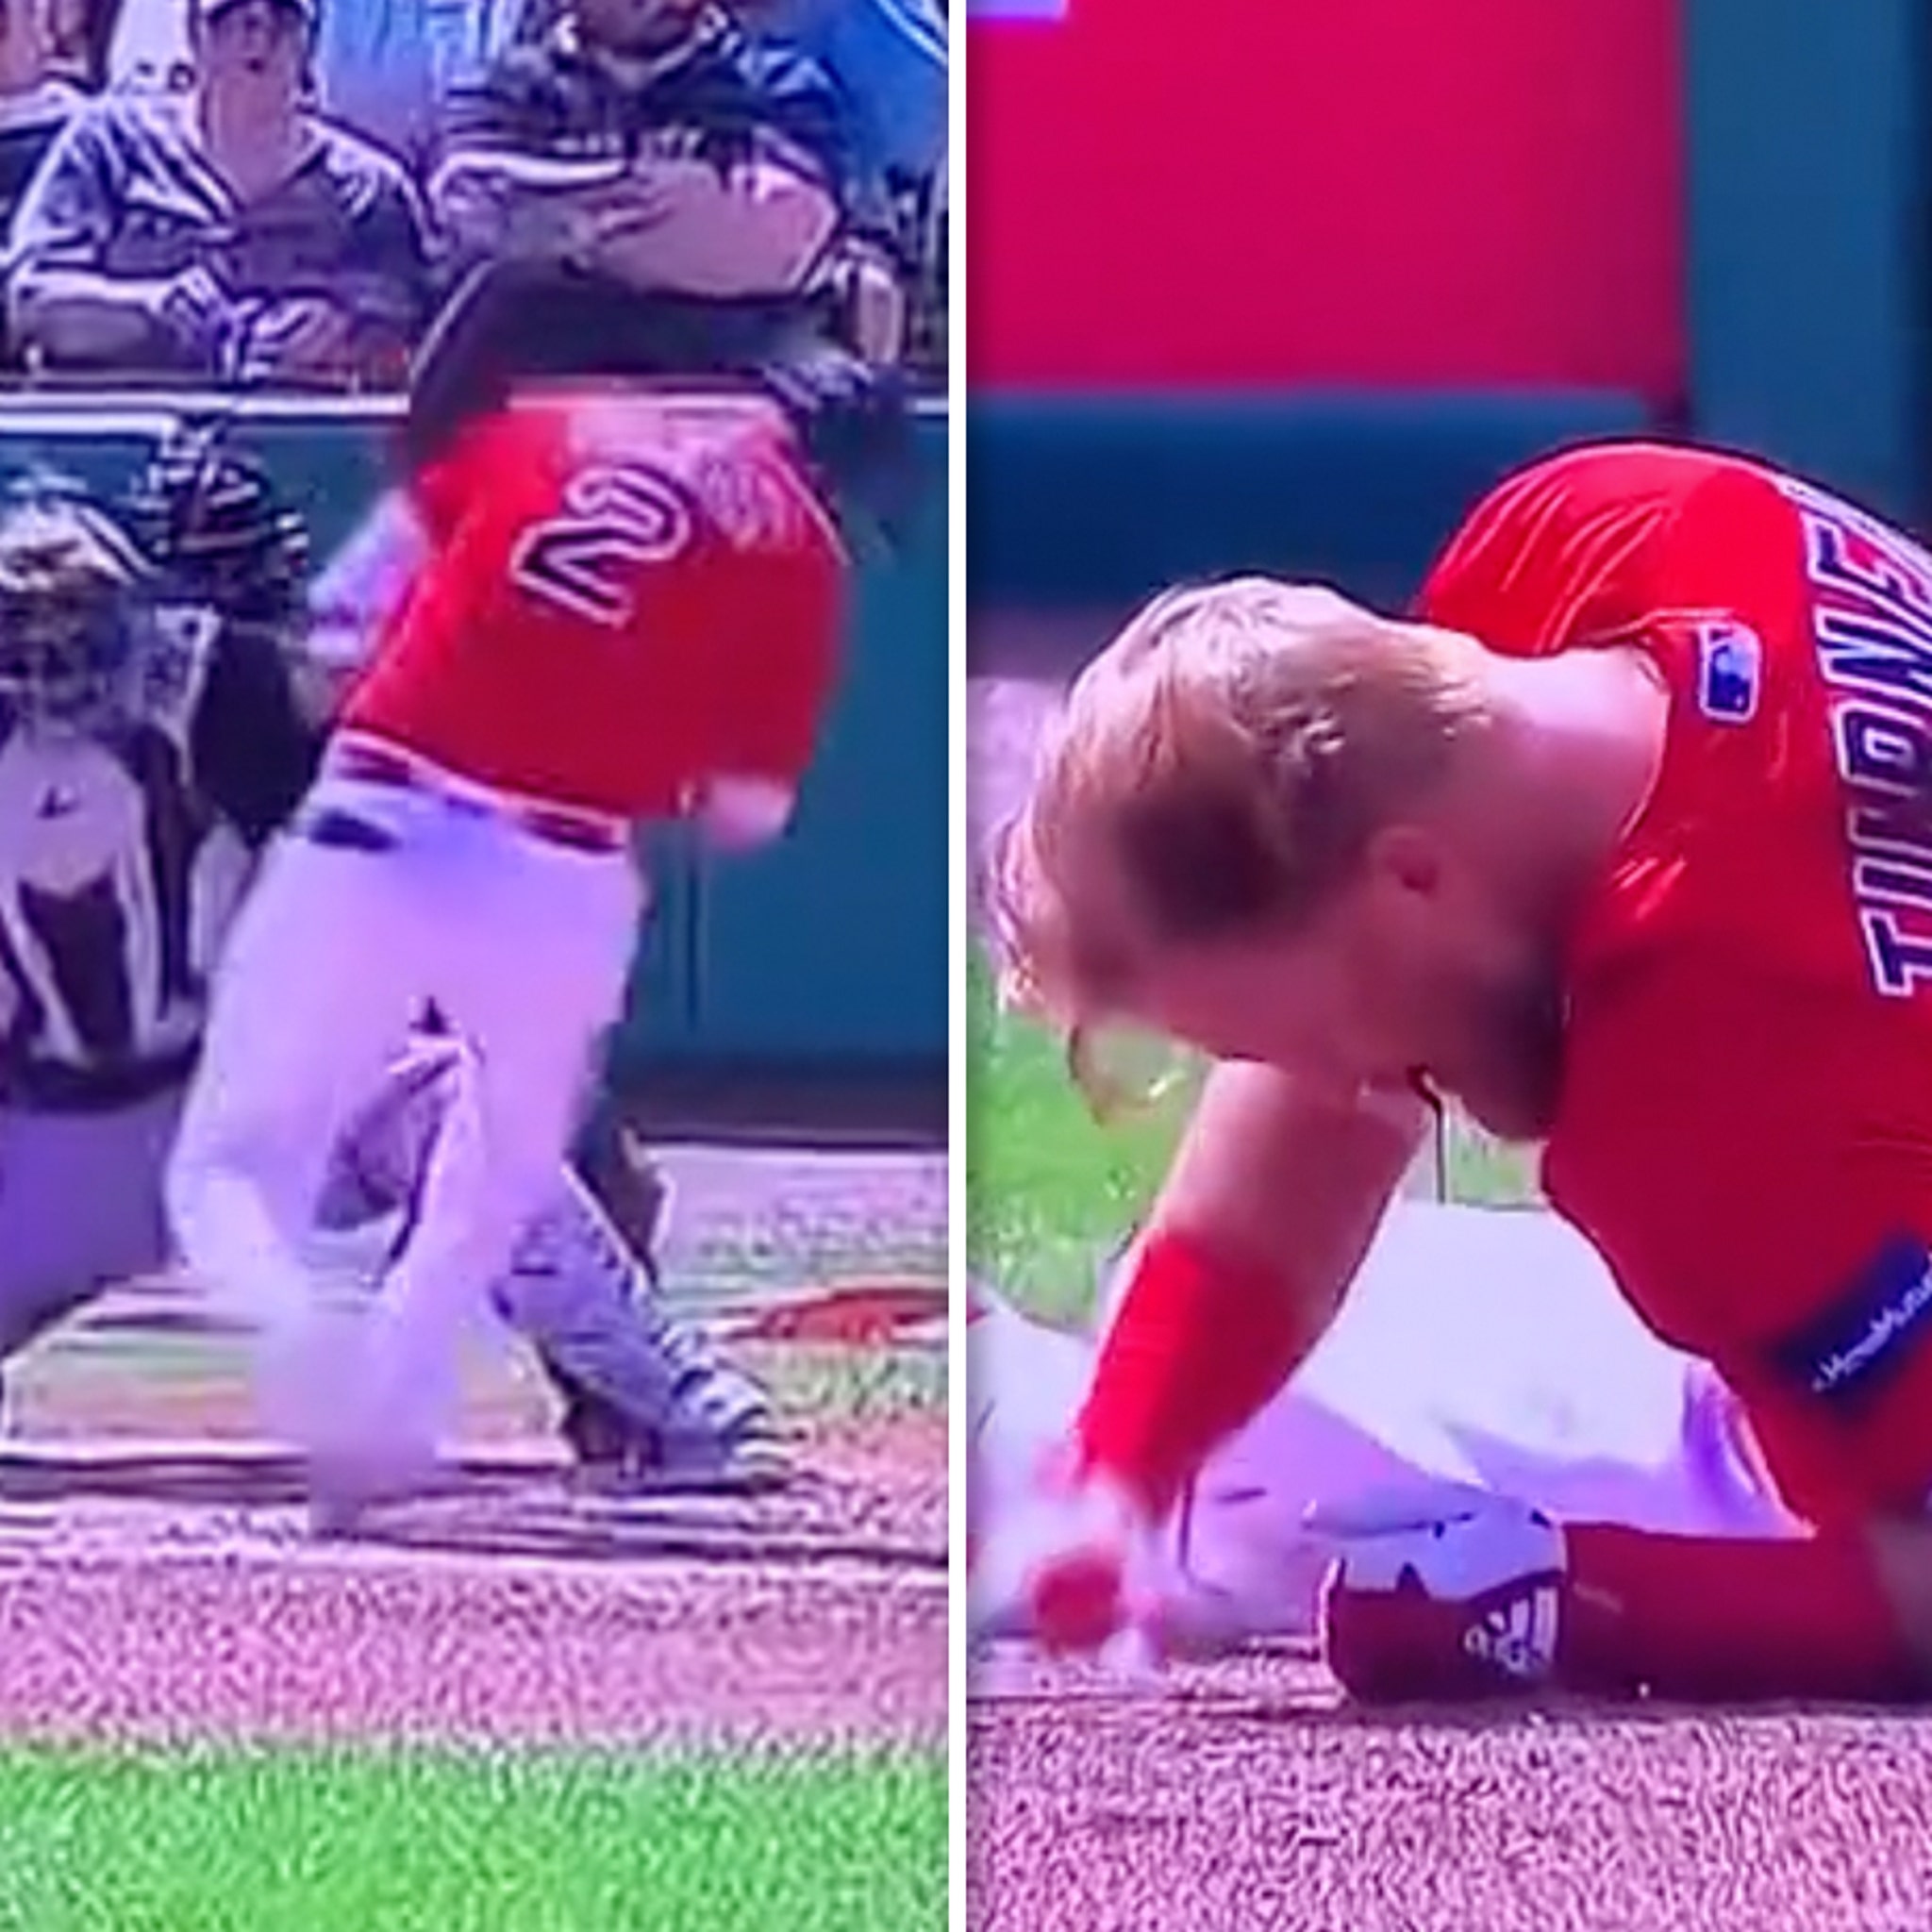 Justin Turner exits game after being hit by pitch